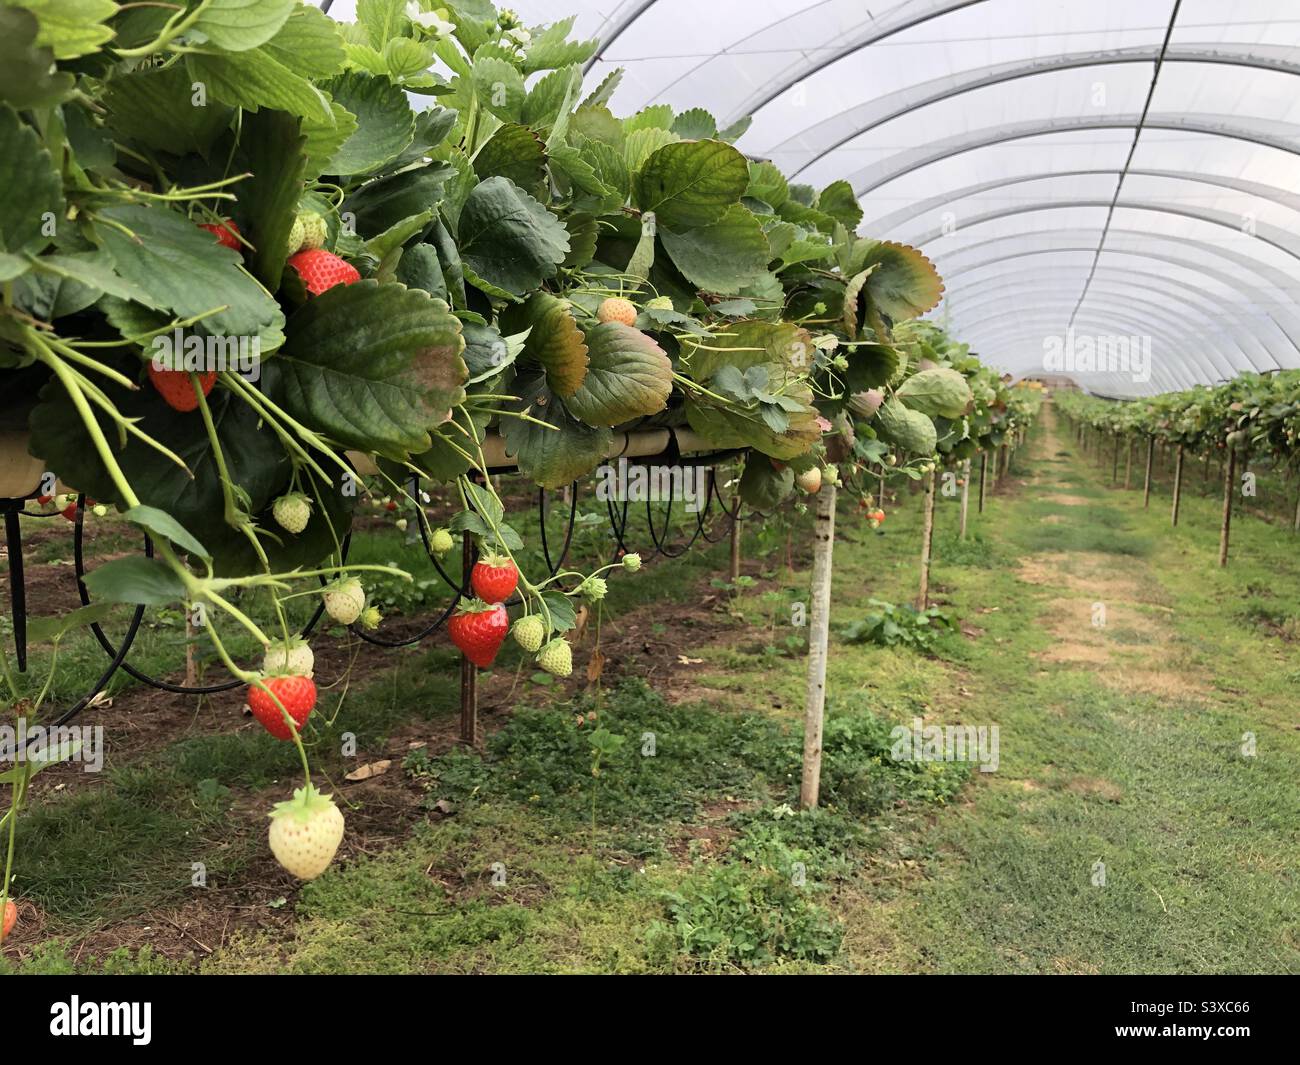 Strawberries growing on a farm in a poly tunnel, England, United Kingdom Stock Photo